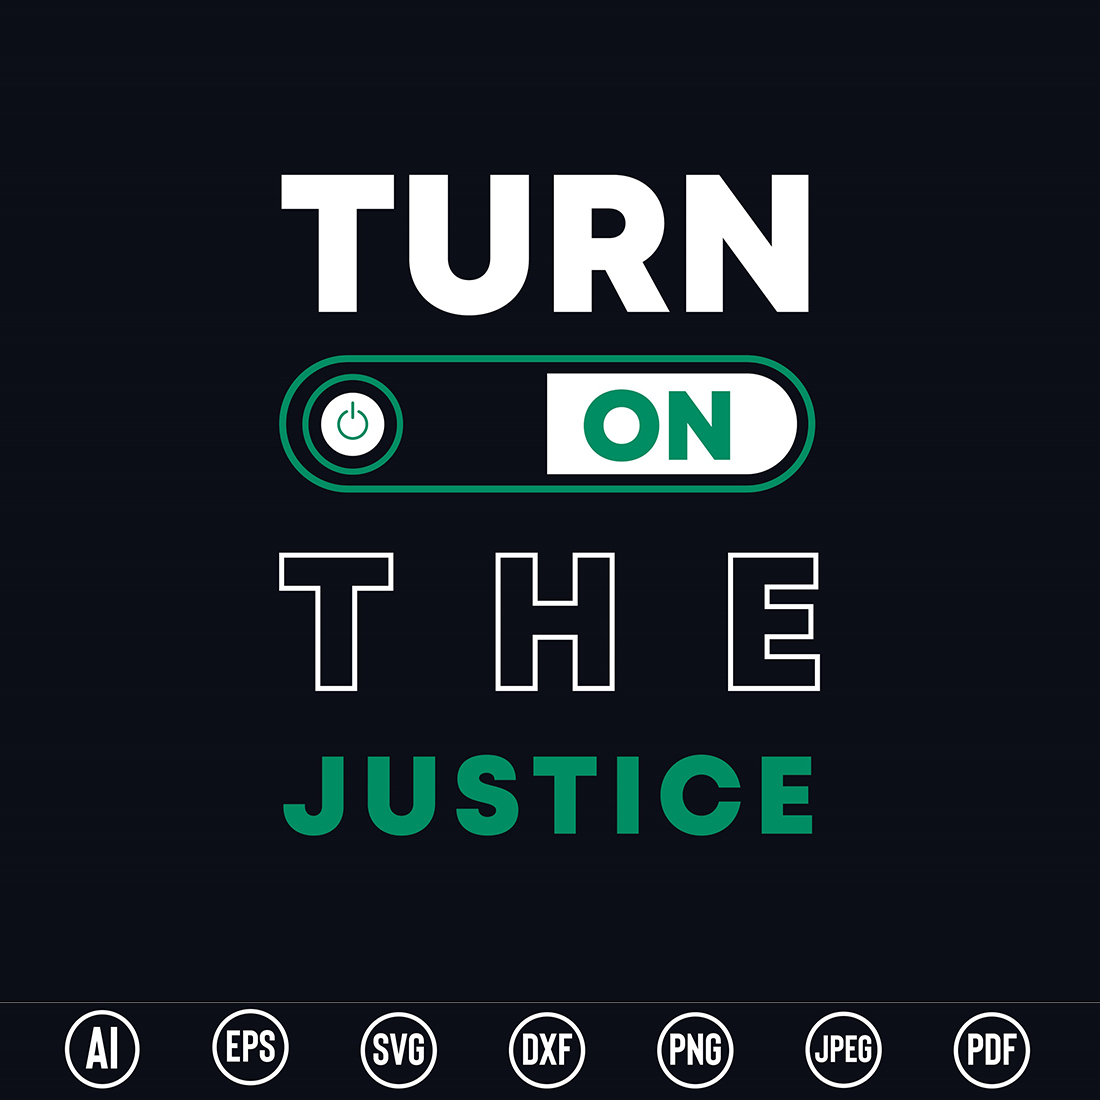 Modern Typography T-Shirt design with “Turn on the justice” quote for t-shirt, posters, stickers, mug prints, banners, gift cards, labels etc preview image.